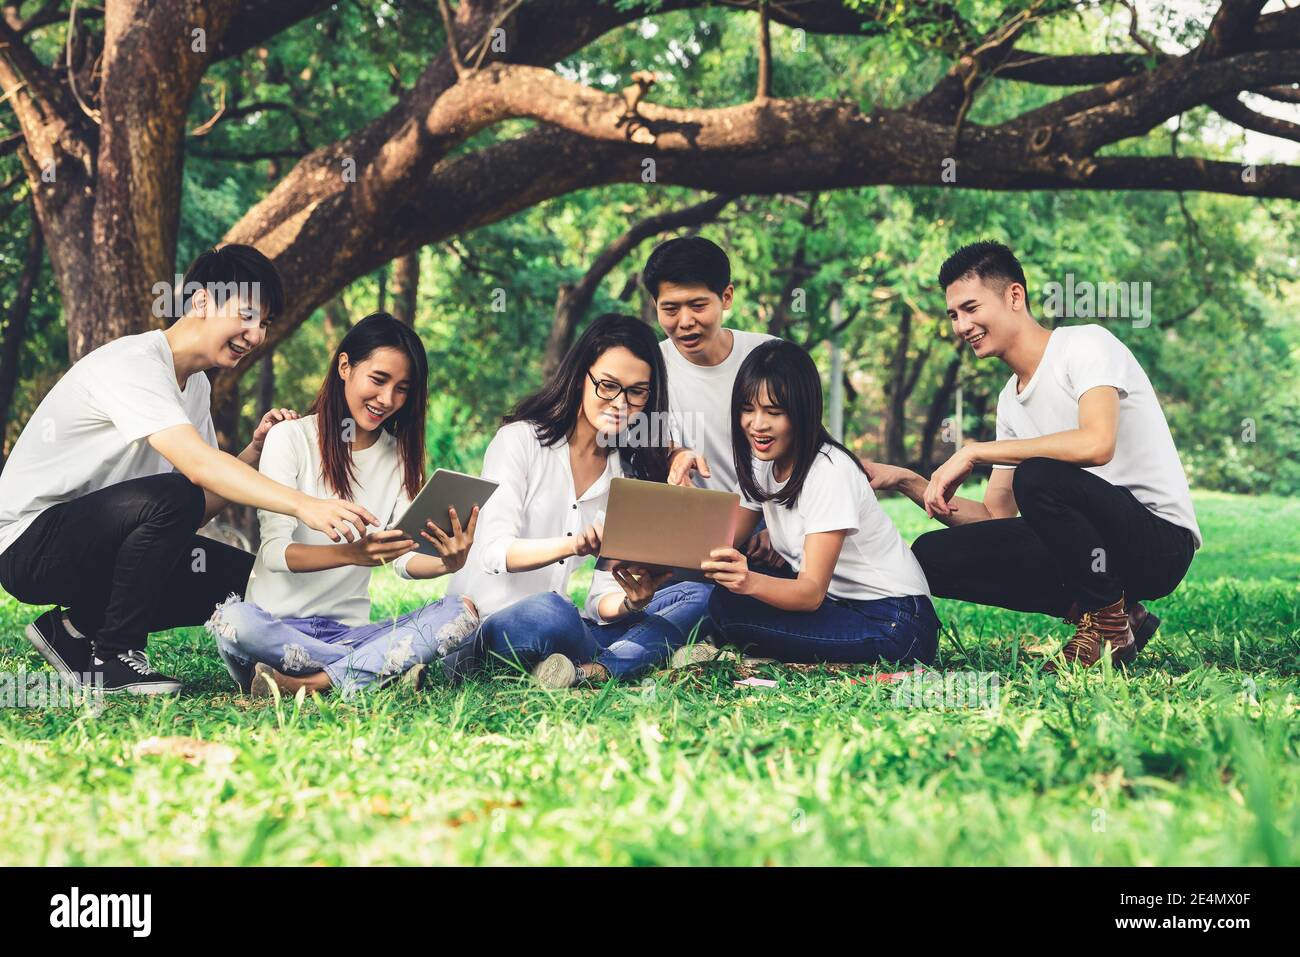 Team of young students studying in a group project in the park of university or school. Happy learning, community teamwork and youth friendship Stock Photo